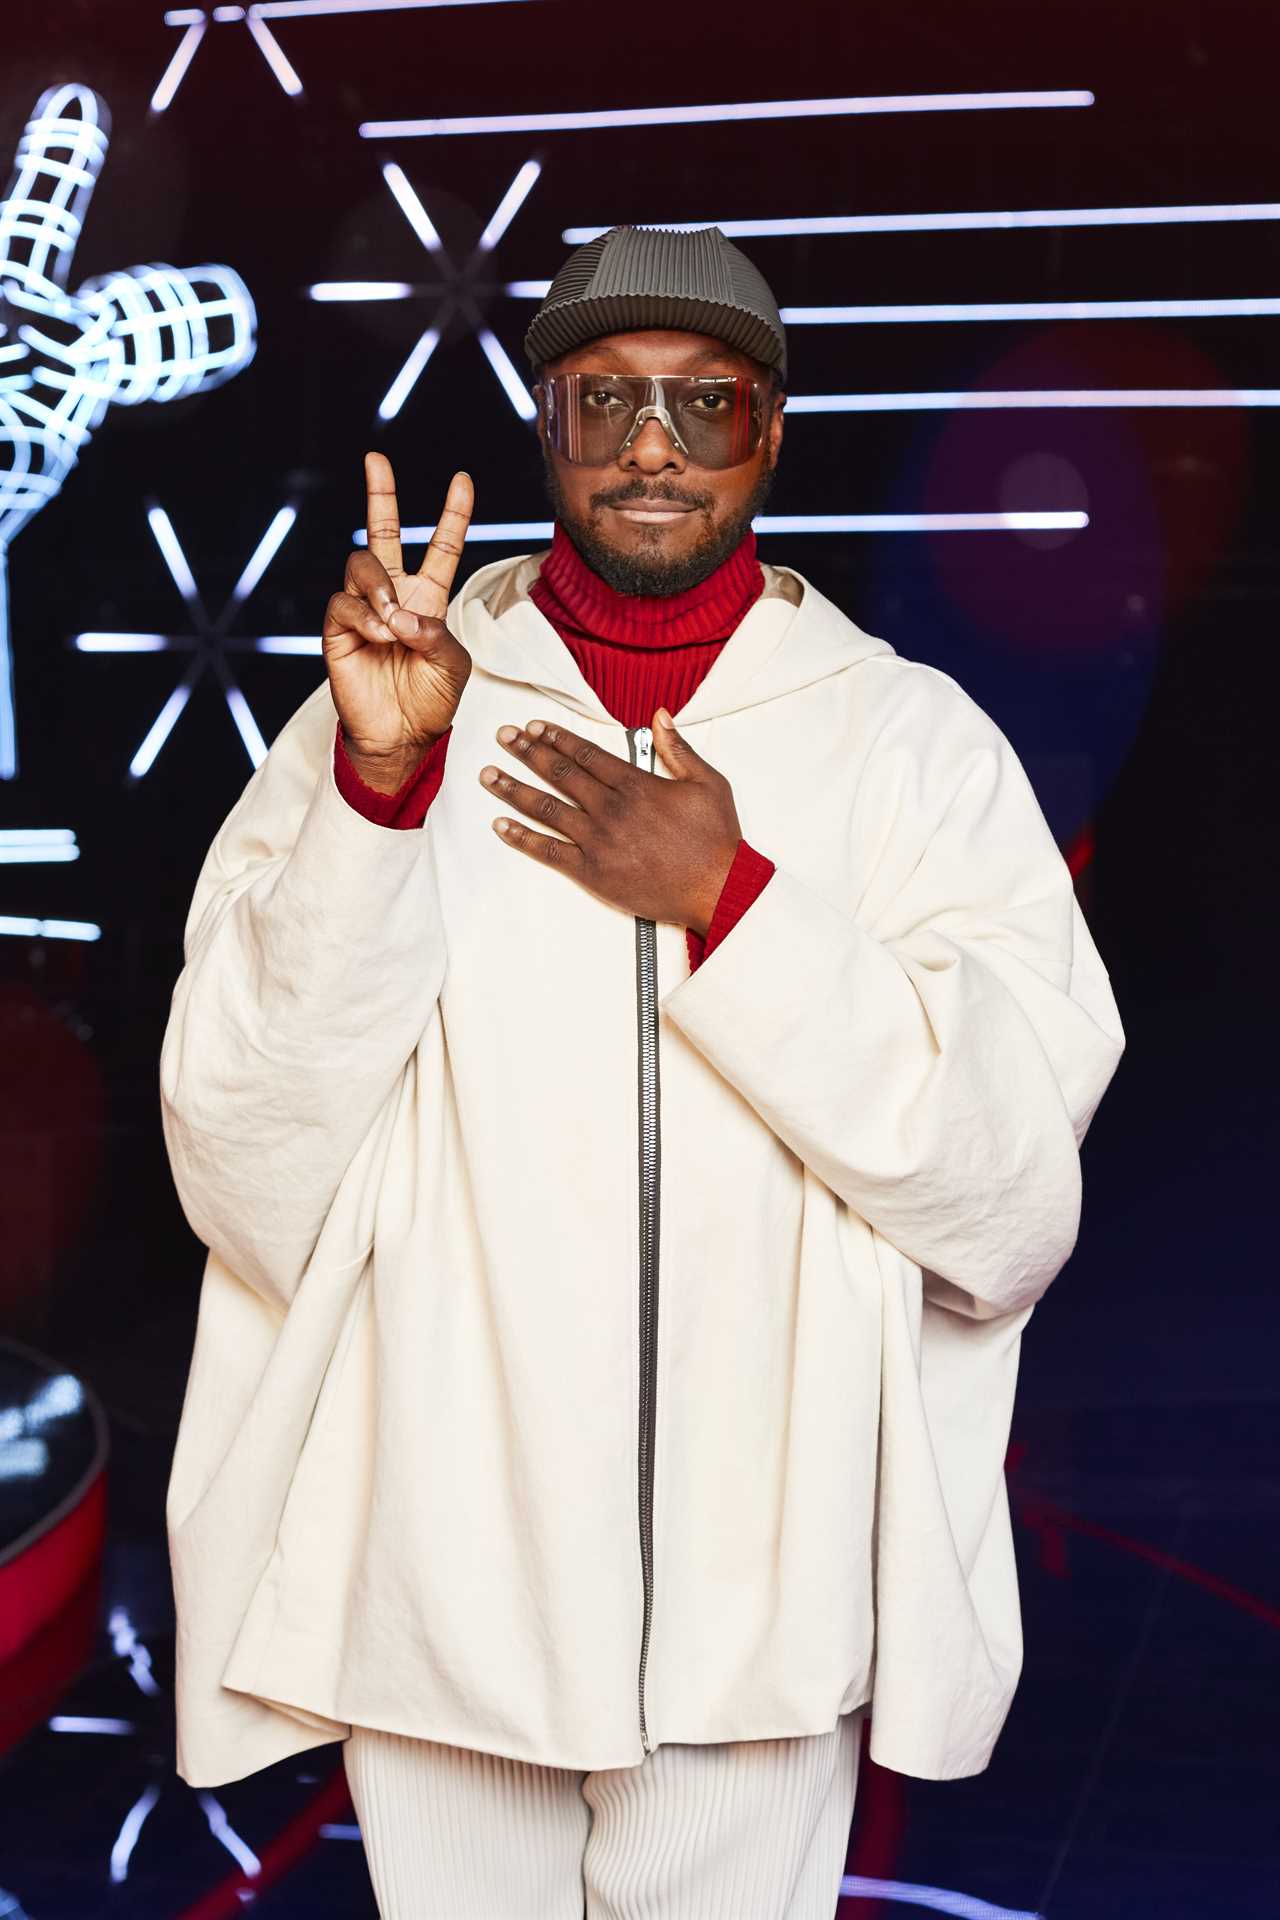 Who are The Voice Kids judges in 2022?